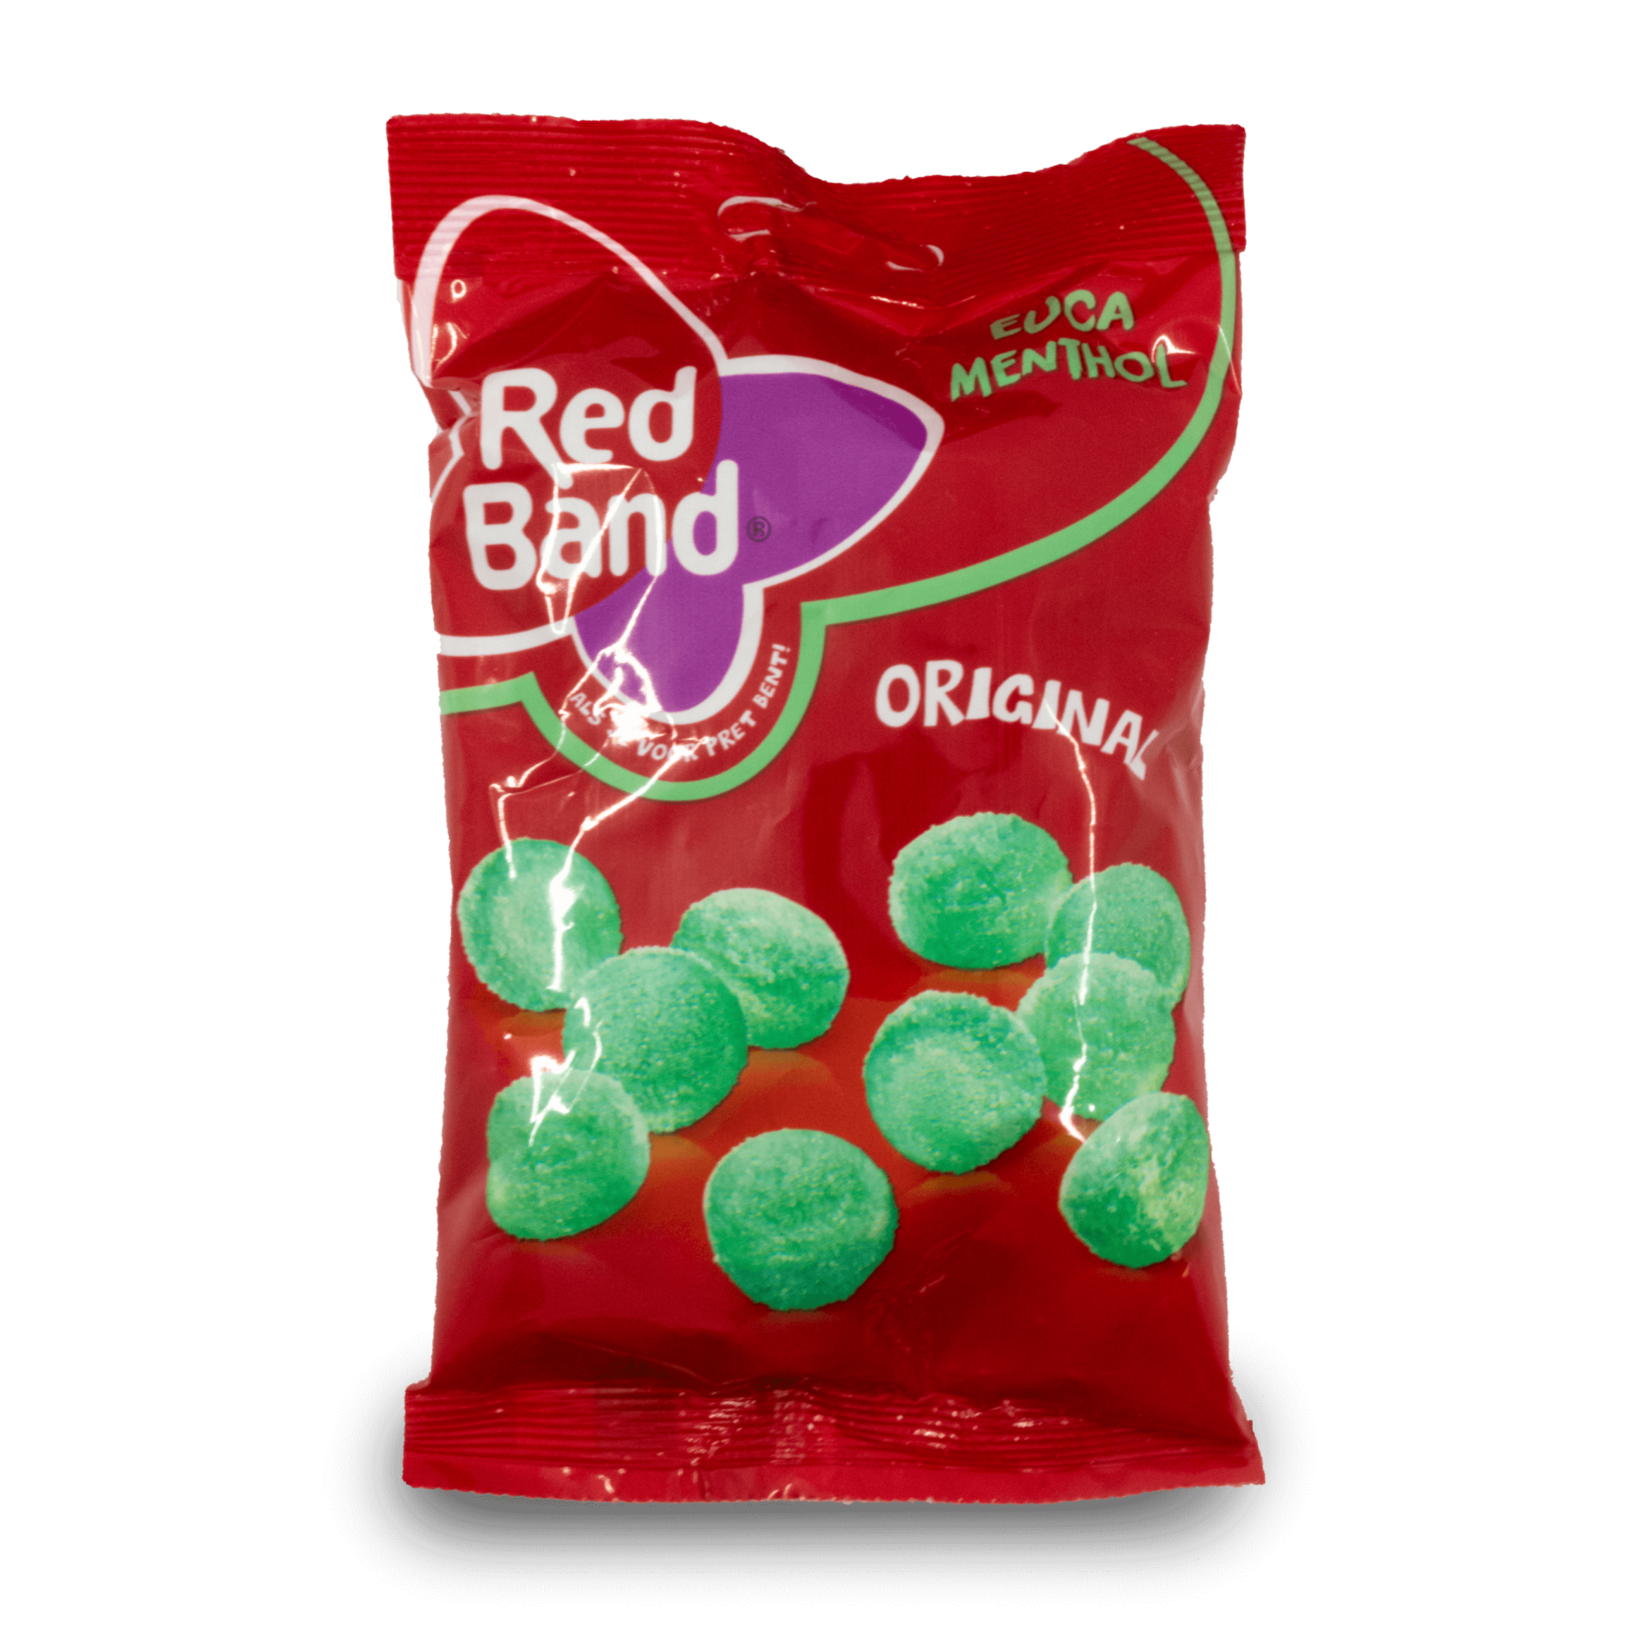 Red Band Red Band Eucamenthol 120g